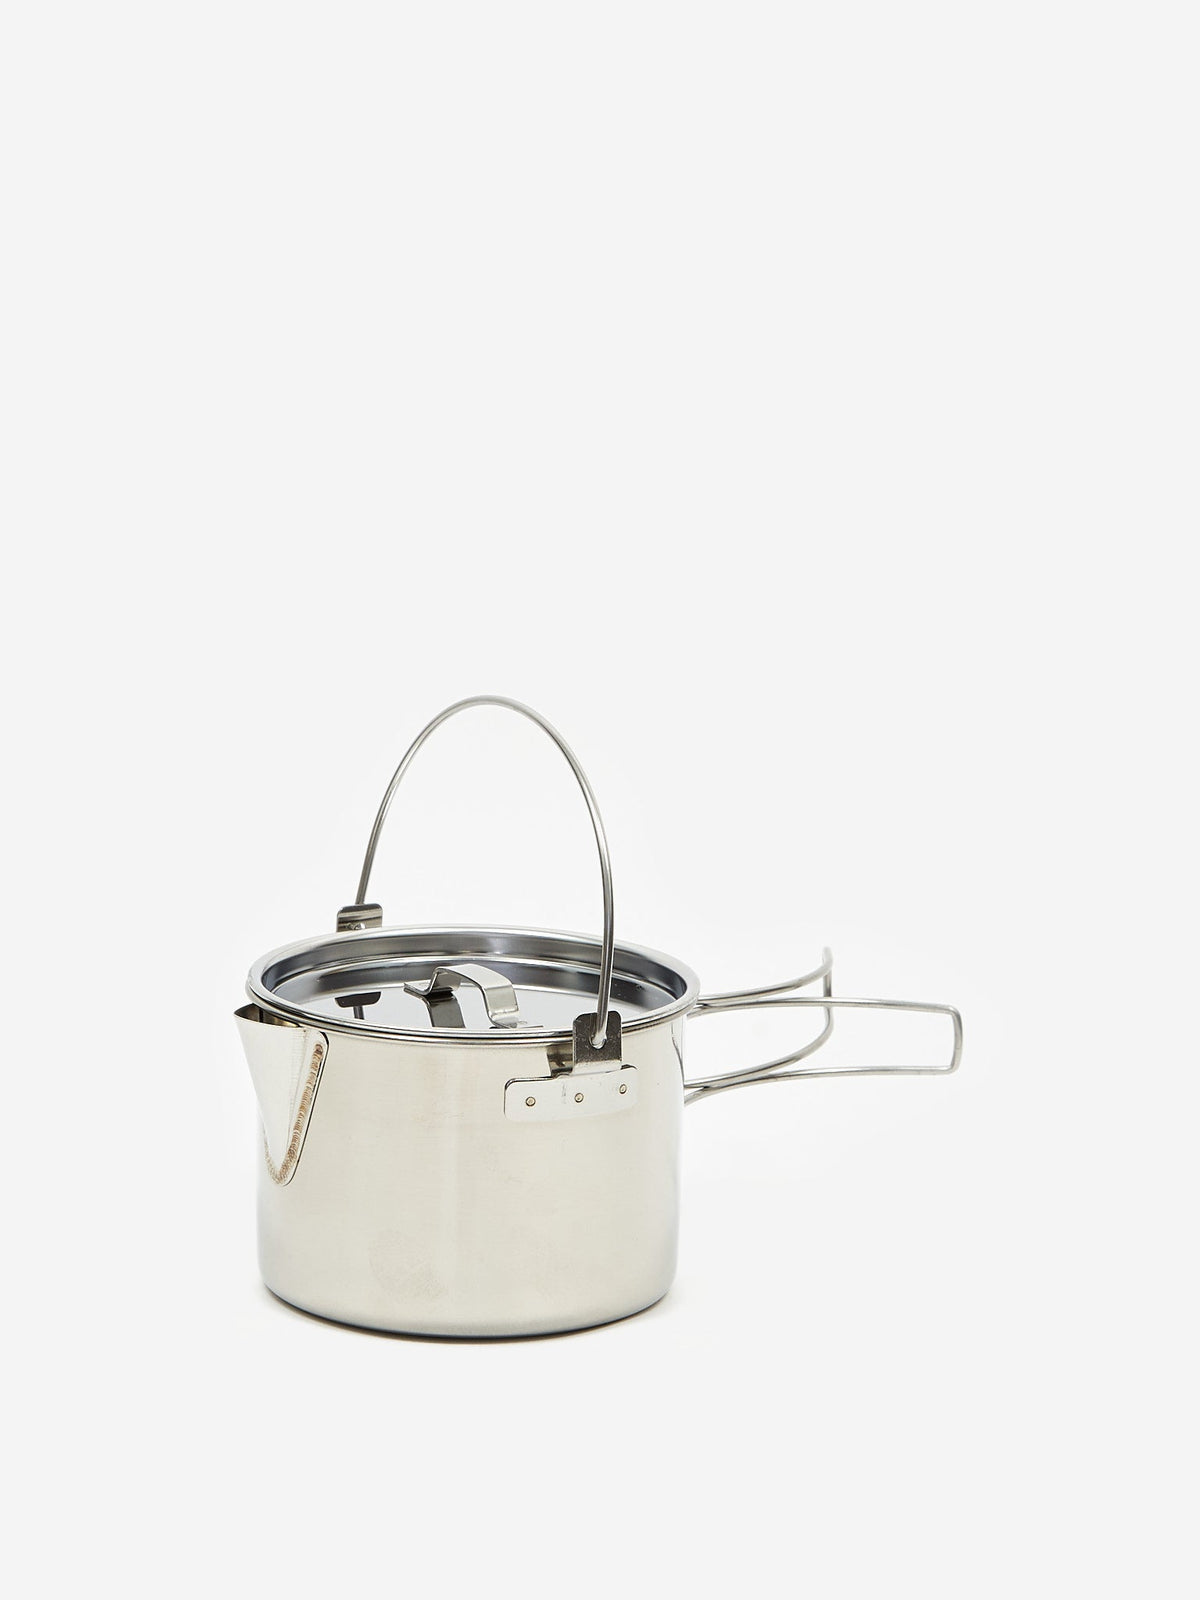 https://www.goodhoodstore.shop/wp-content/uploads/1692/09/save-big-on-snow-peak-kettle-no-1-snow-peak-find-the-top-products-for-the-lowest-prices-and-great-customer-service_0.jpg